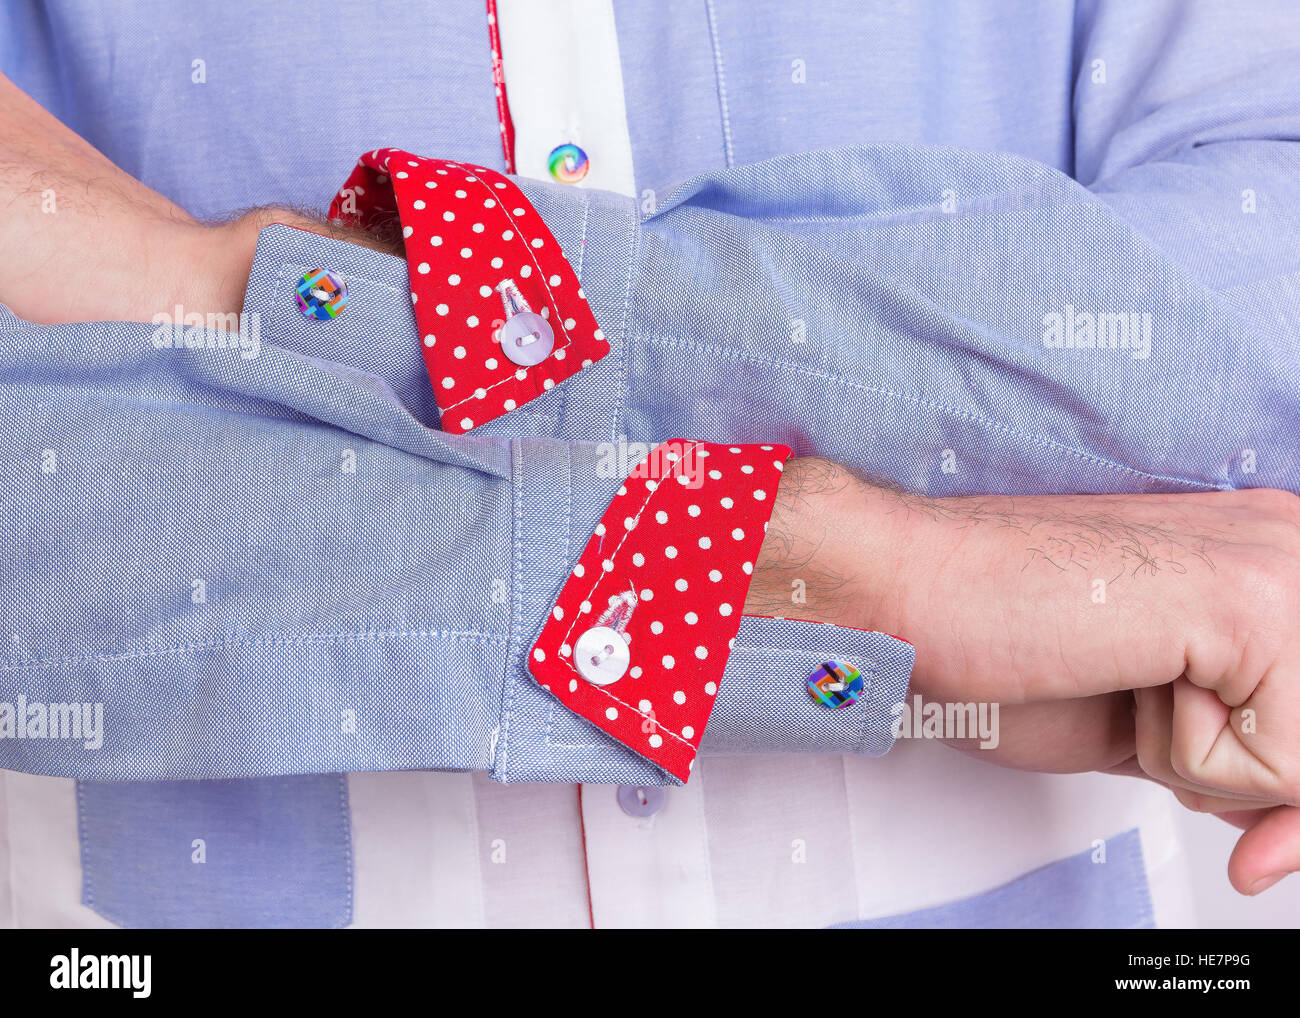 Stylish man dressed in a blue formal shirt, detail close-up of sleeves inc red polkadot cuffs and rainbow buttons Stock Photo